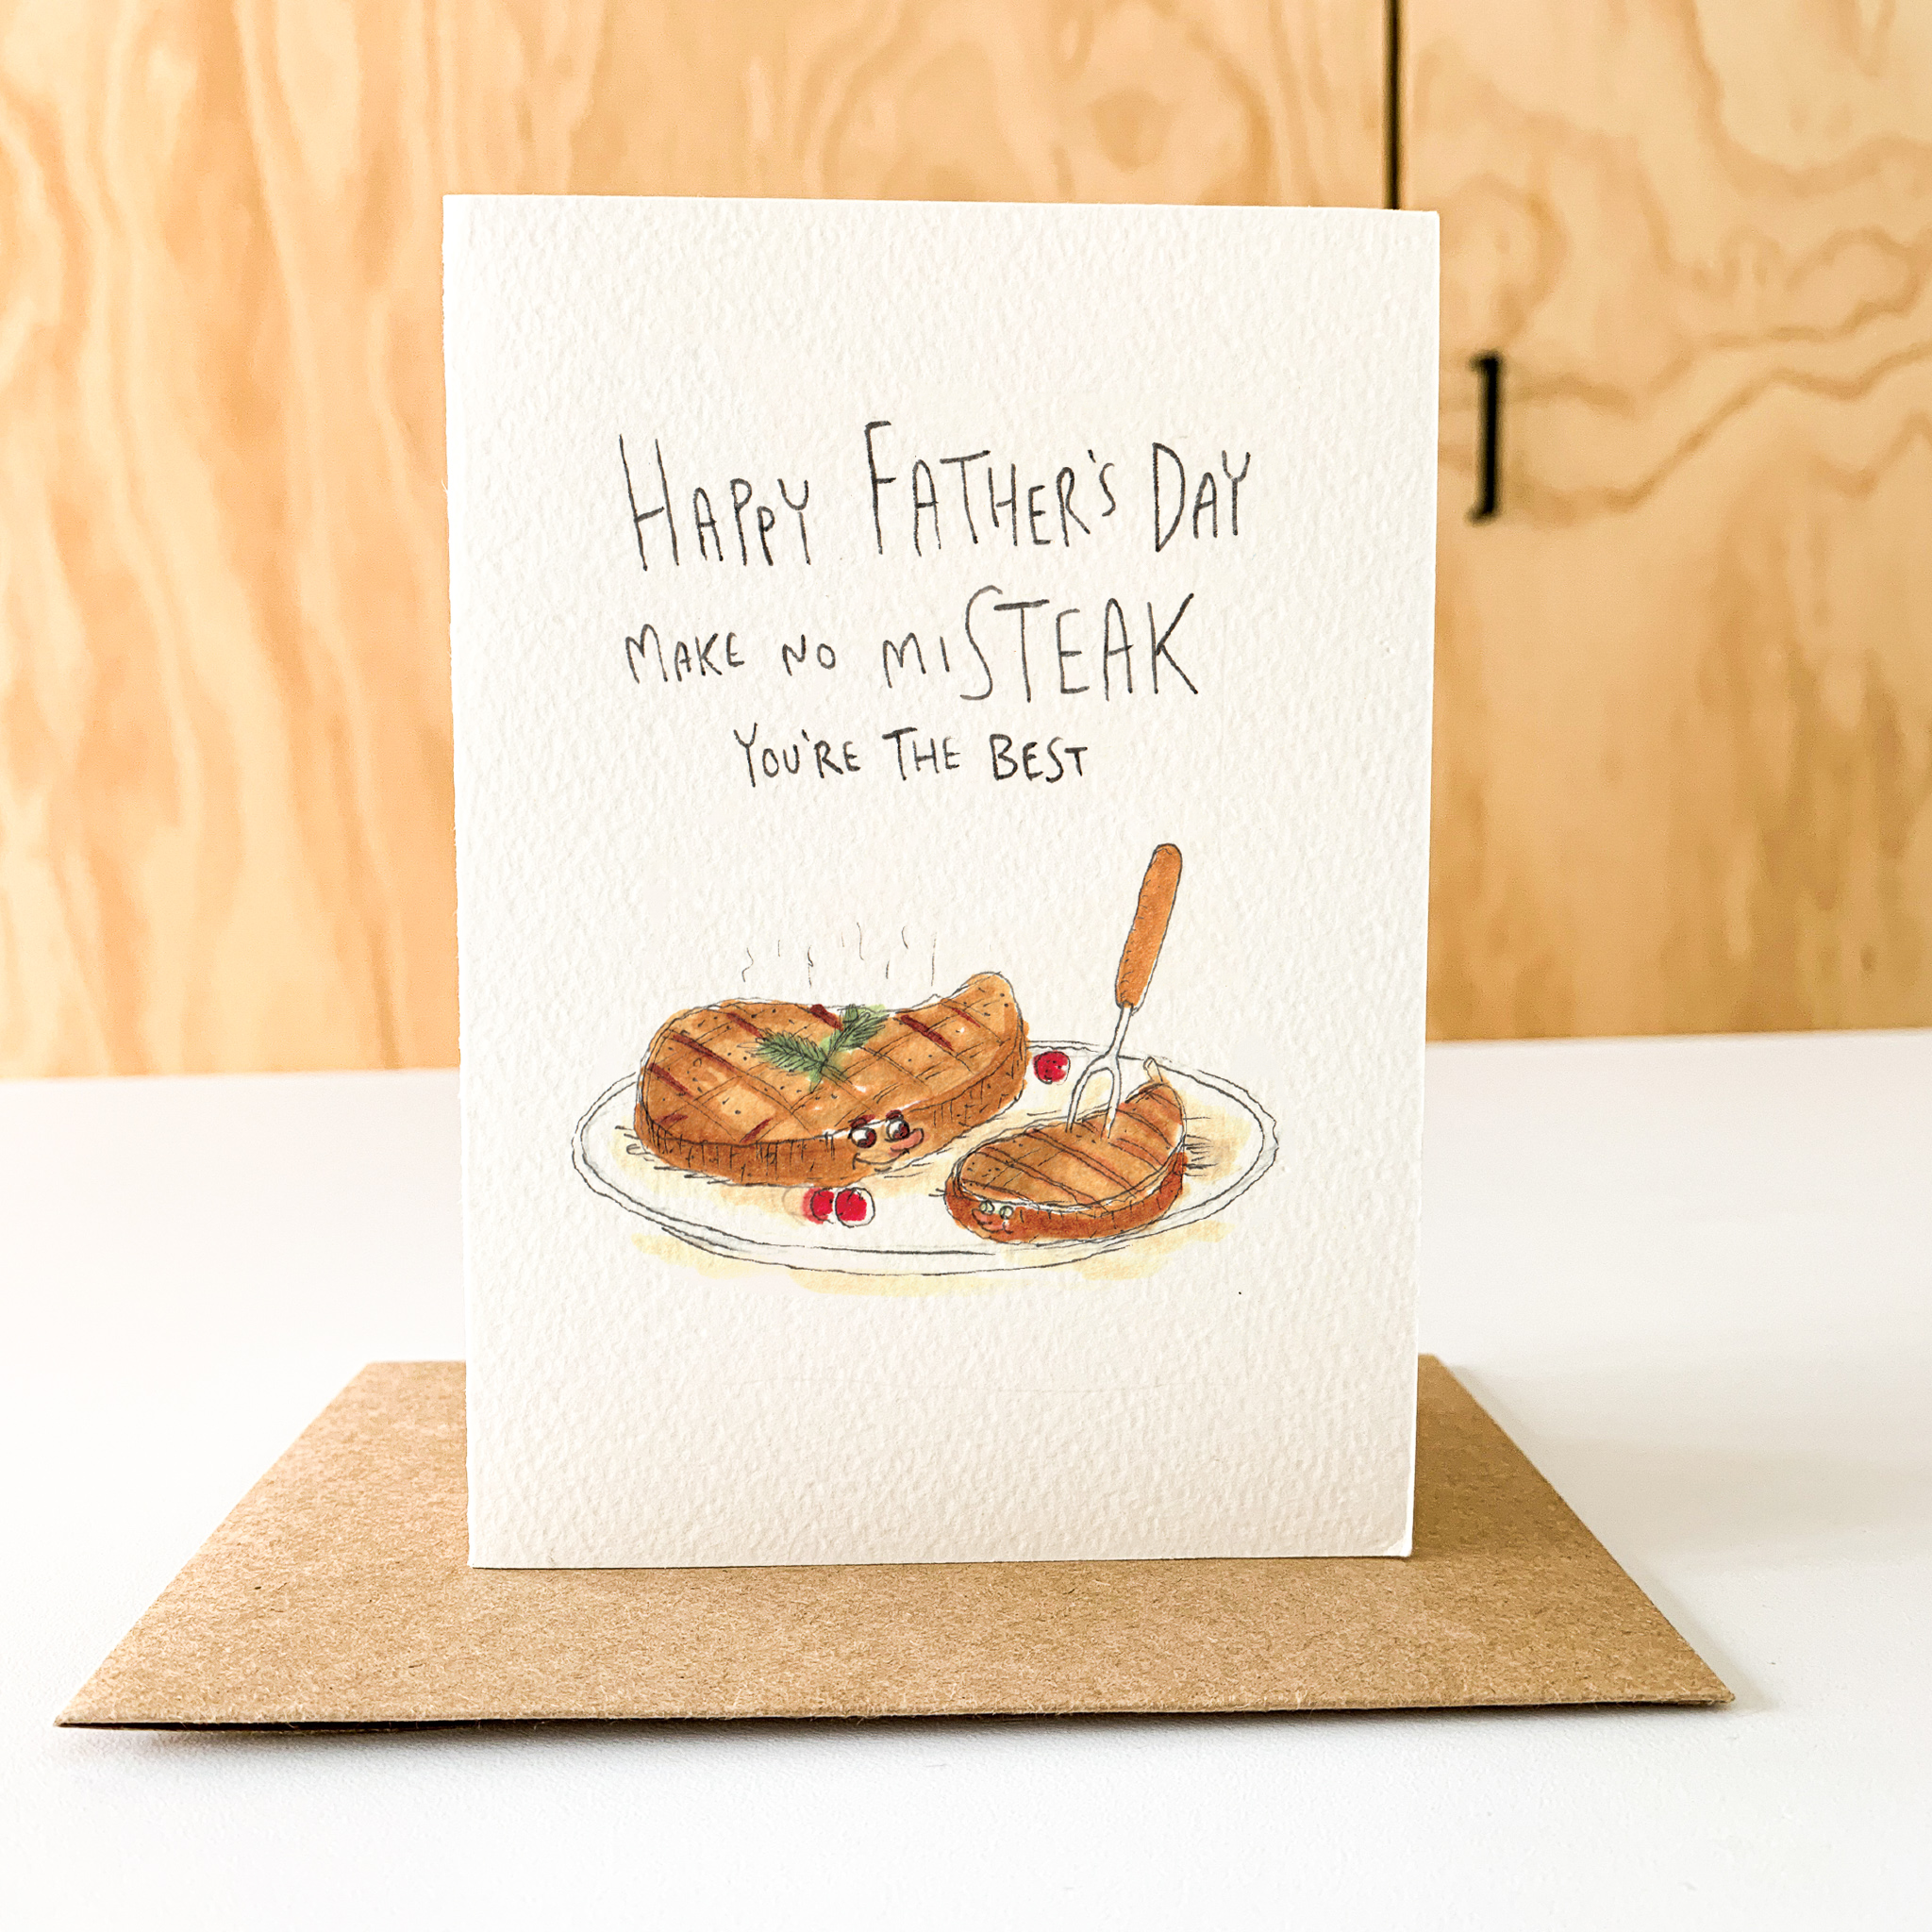 Happy Father's Day, Make no Misteak, you're the best dad